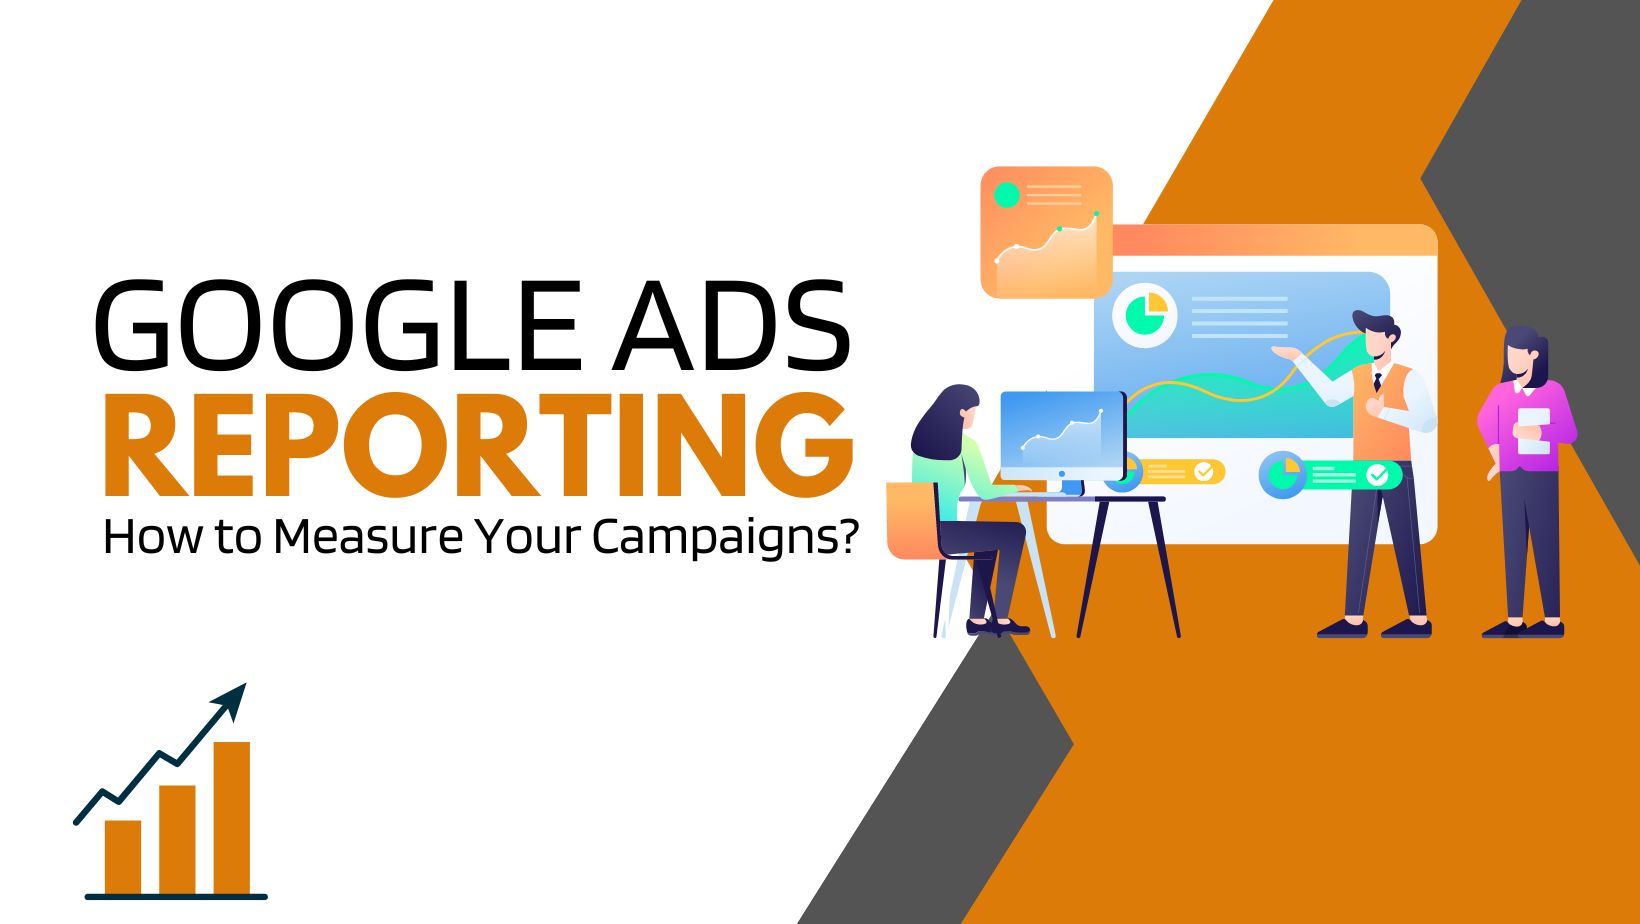 Google Ads Reporting: How to Measure Your Campaigns?